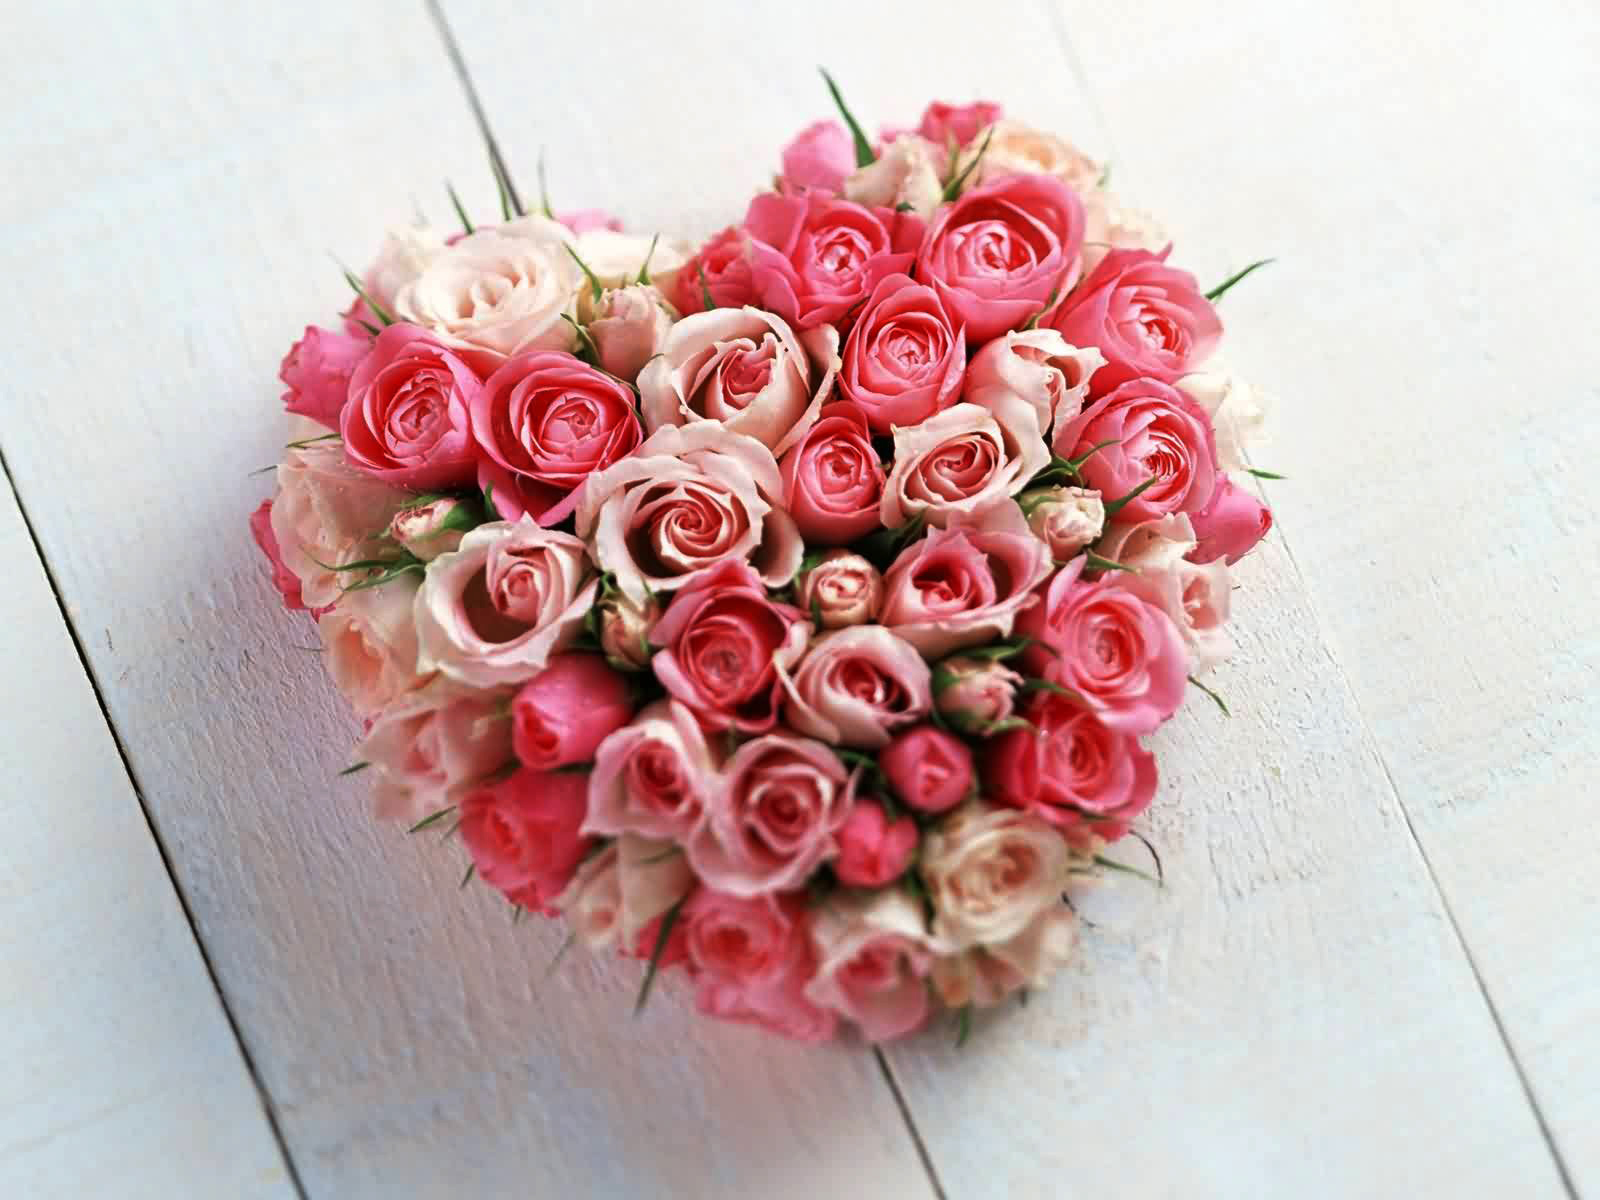 Beautiful Lovely Pink And White Roses Boquet For You My Lovely Sweetheart On This Valentine